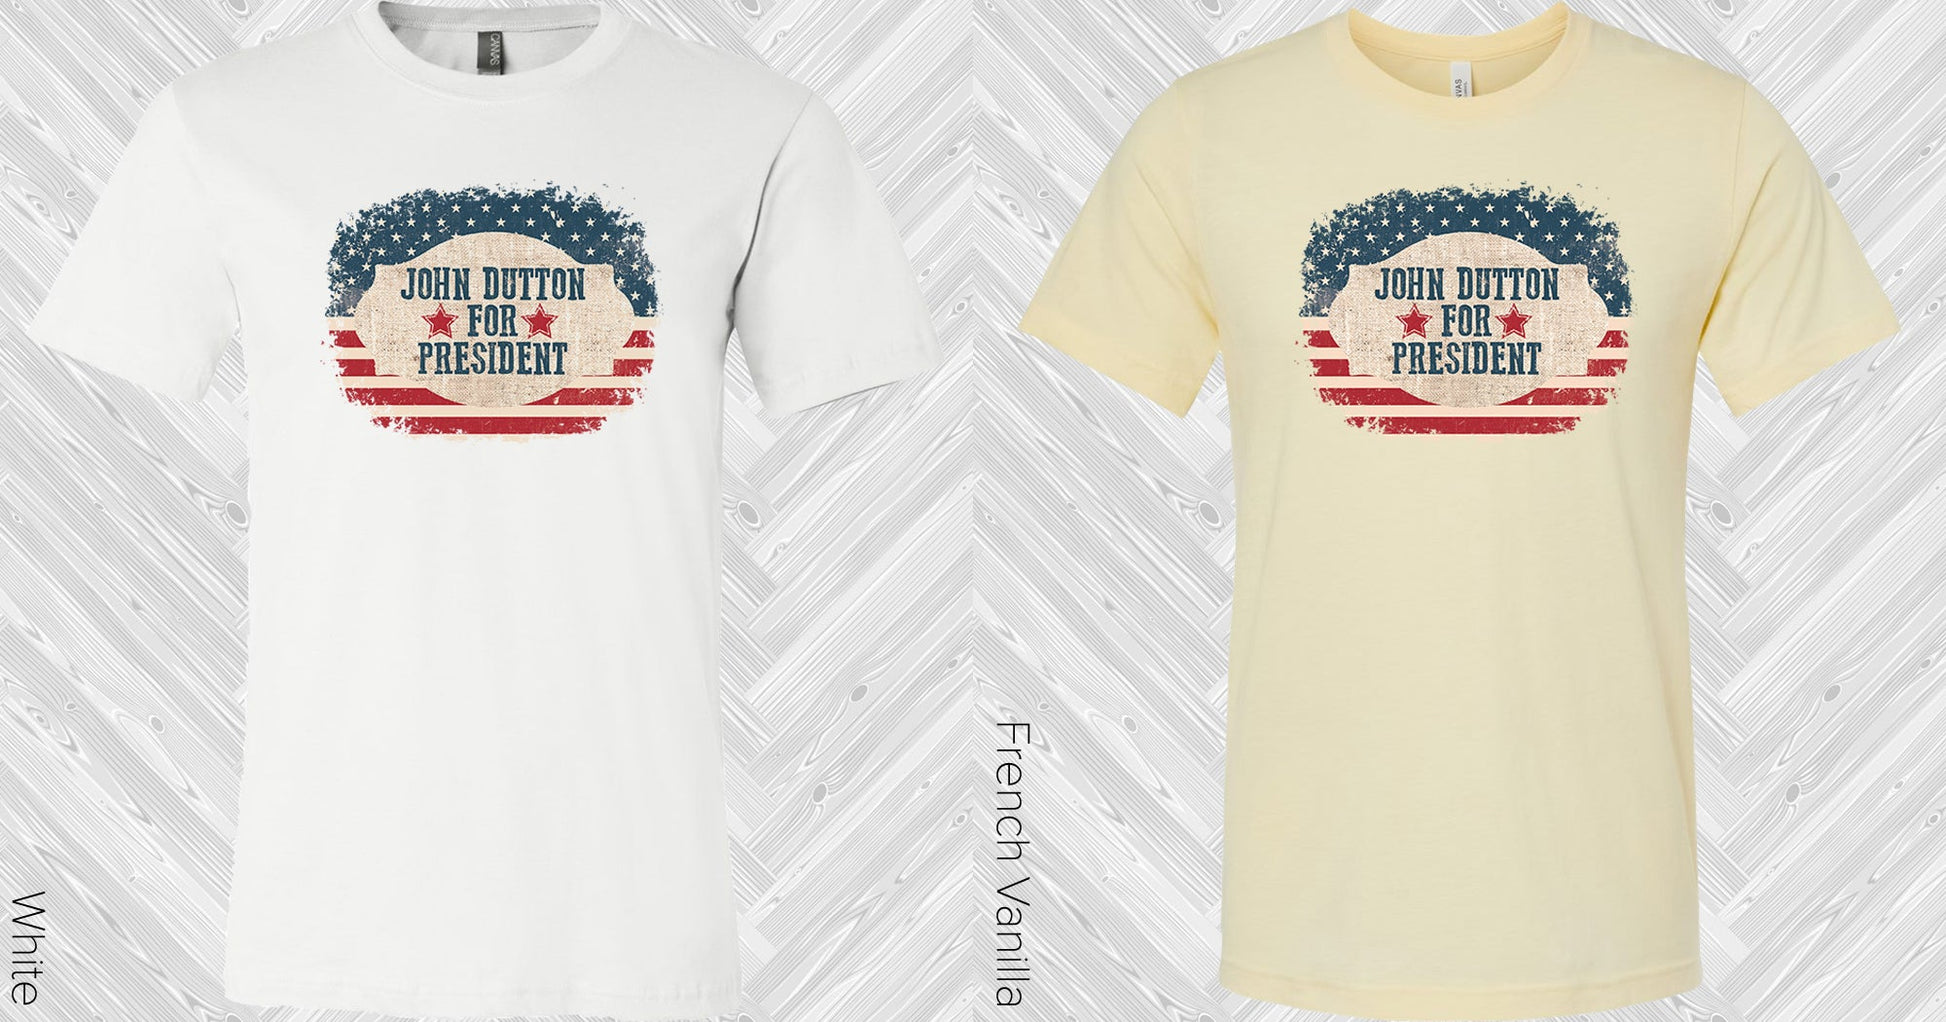 John Dutton For President Graphic Tee Graphic Tee